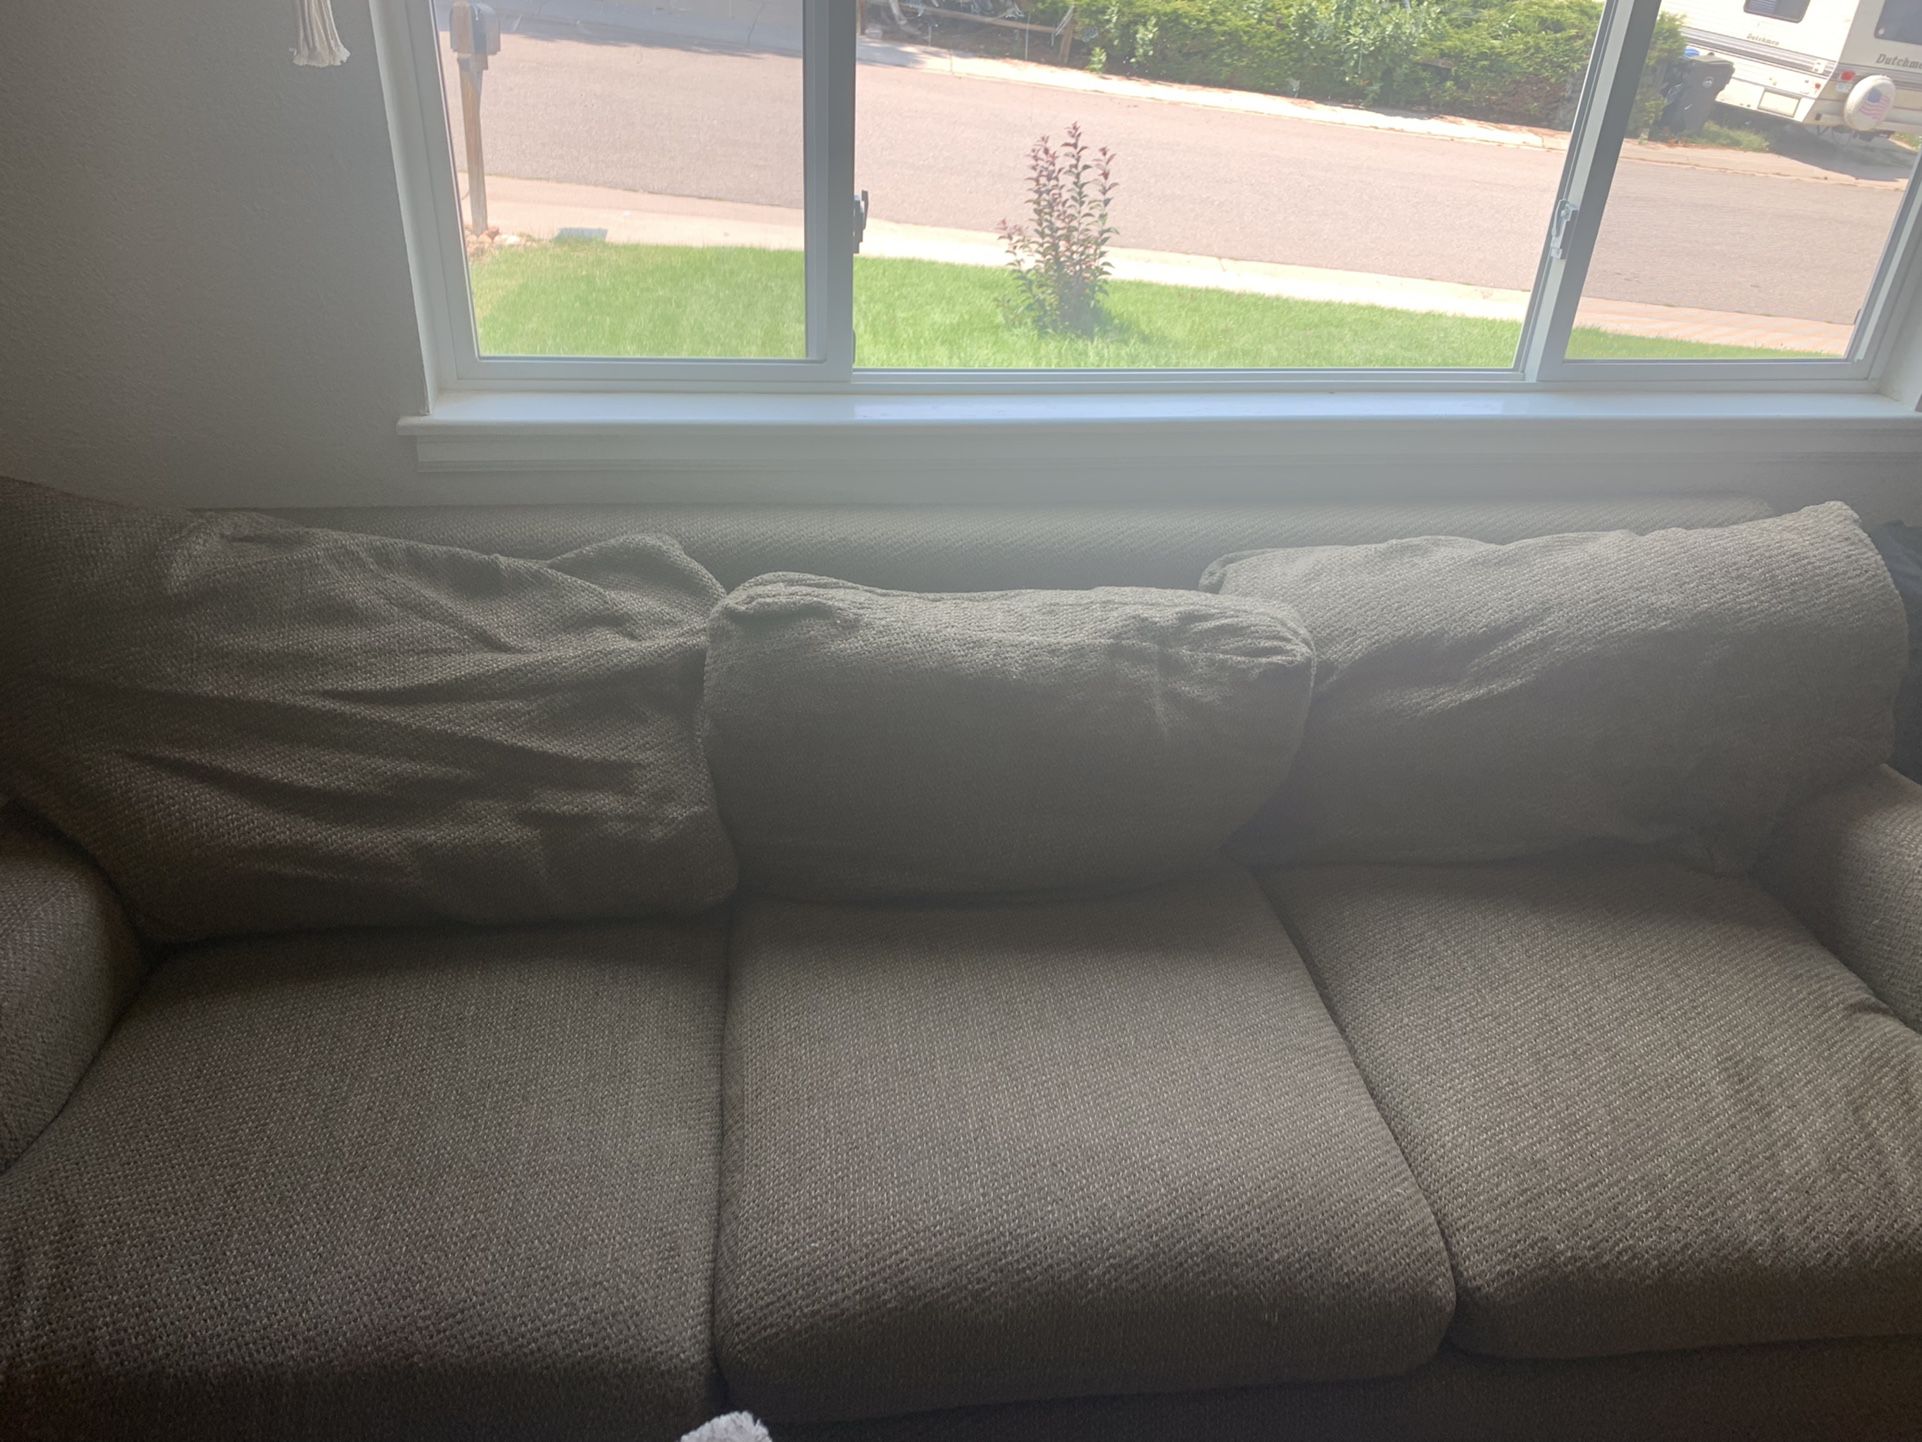 Couch (3 Seat With Love Seat/oversized Chair) + Mavy Blue Couch Covers